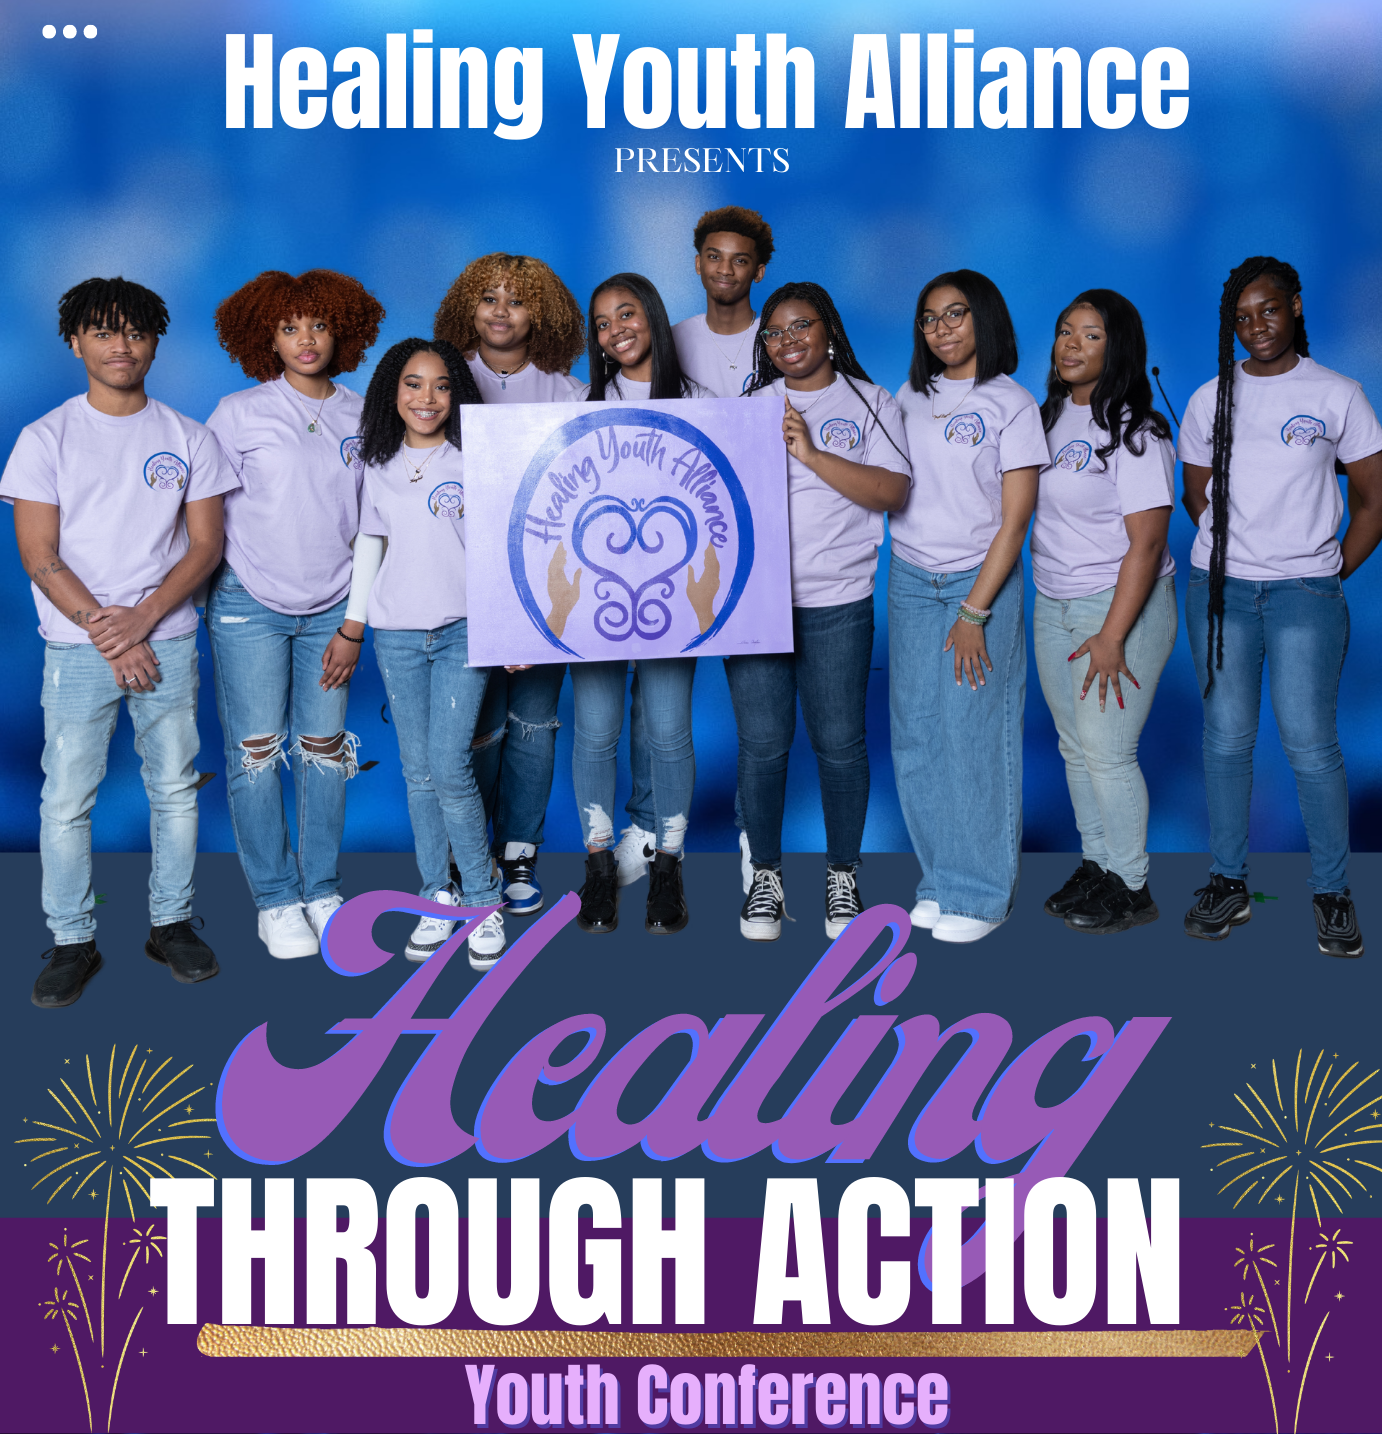 Healing Youth Alliance Presents Healing Through Action Youth Conference